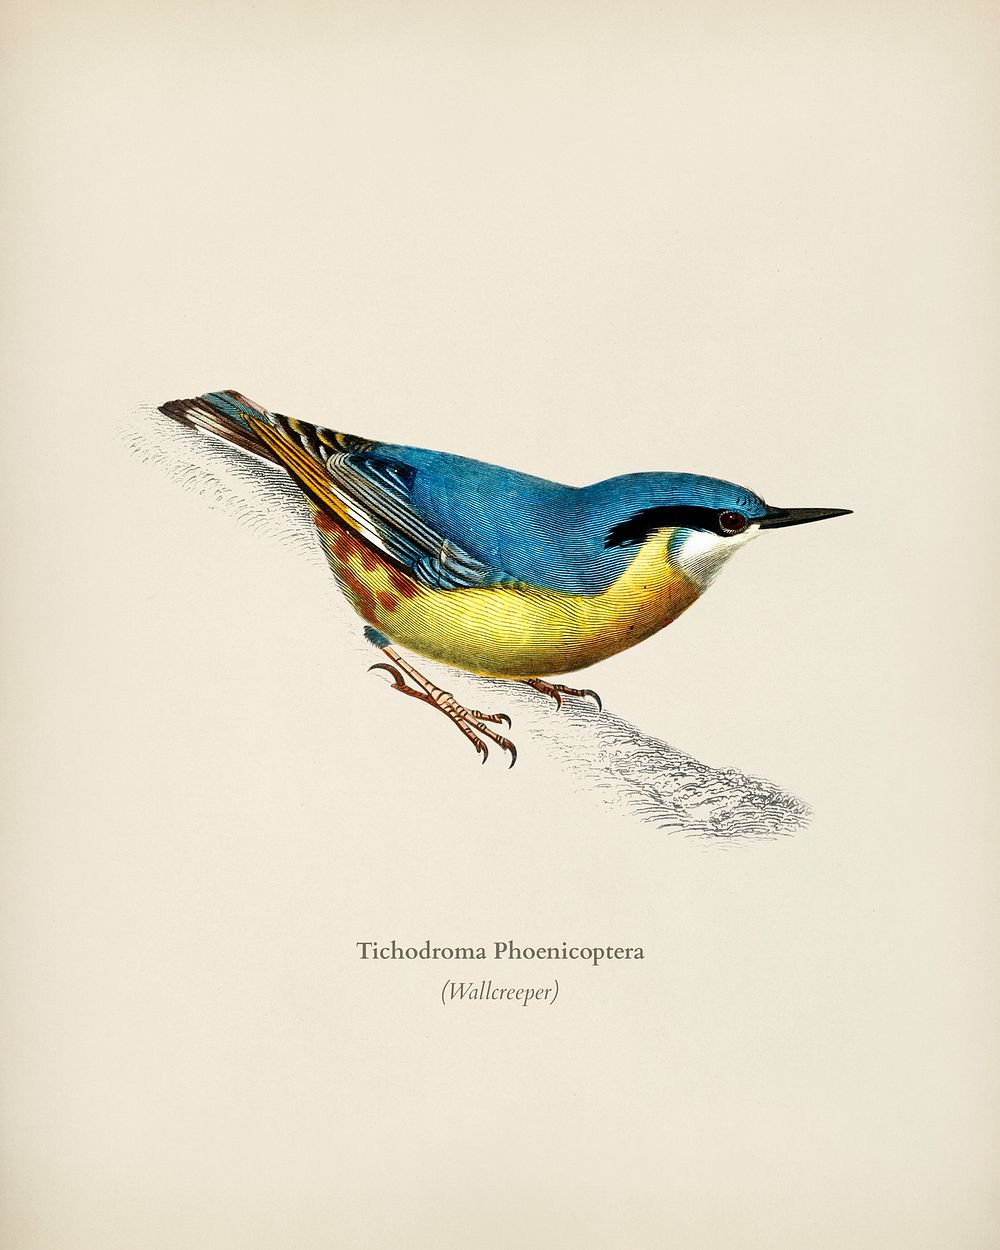 Wallcreeper (Tichodroma Phoenicoptera) illustrated by Charles Dessalines D' Orbigny (1806-1876). Digitally enhanced from our…